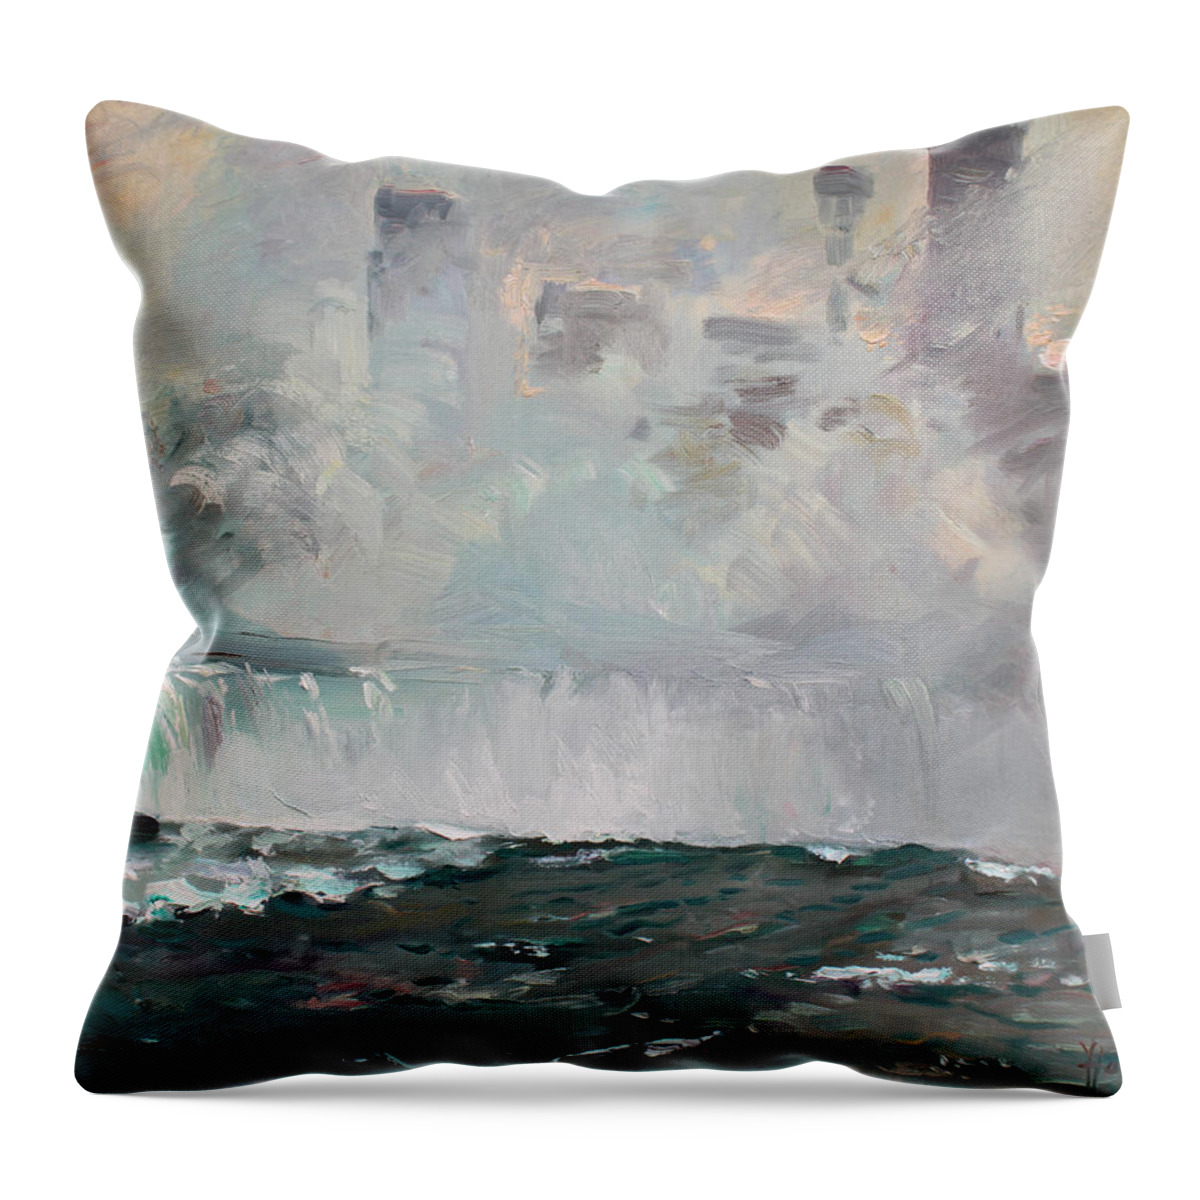 Niagara Falls Throw Pillow featuring the painting Late Afternoon in Niagara Falls by Ylli Haruni